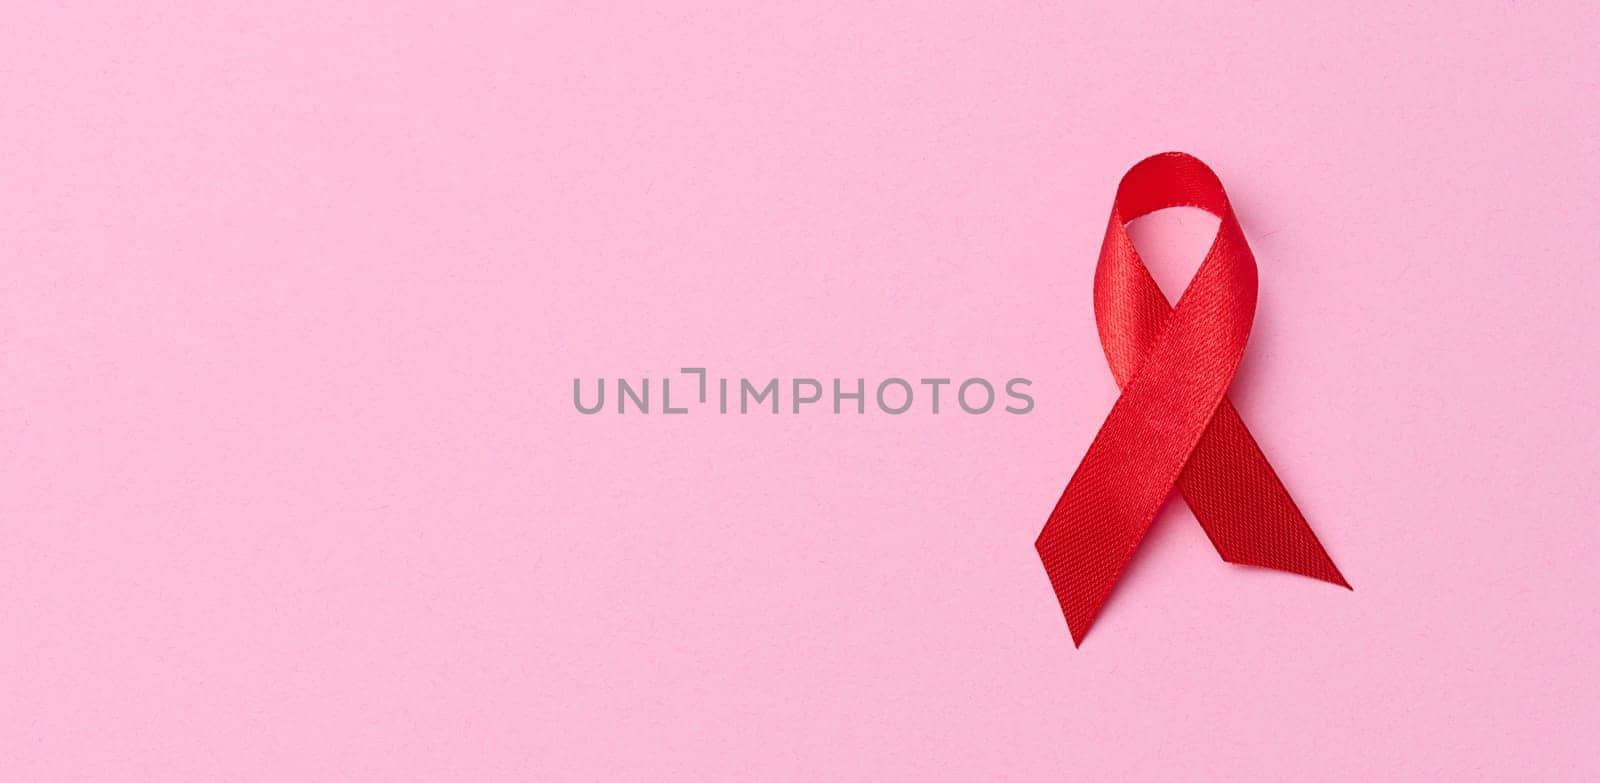 A silk red ribbon in the form of a bow on a pink background, a symbol of the fight against AIDS and a sign of solidarity and support